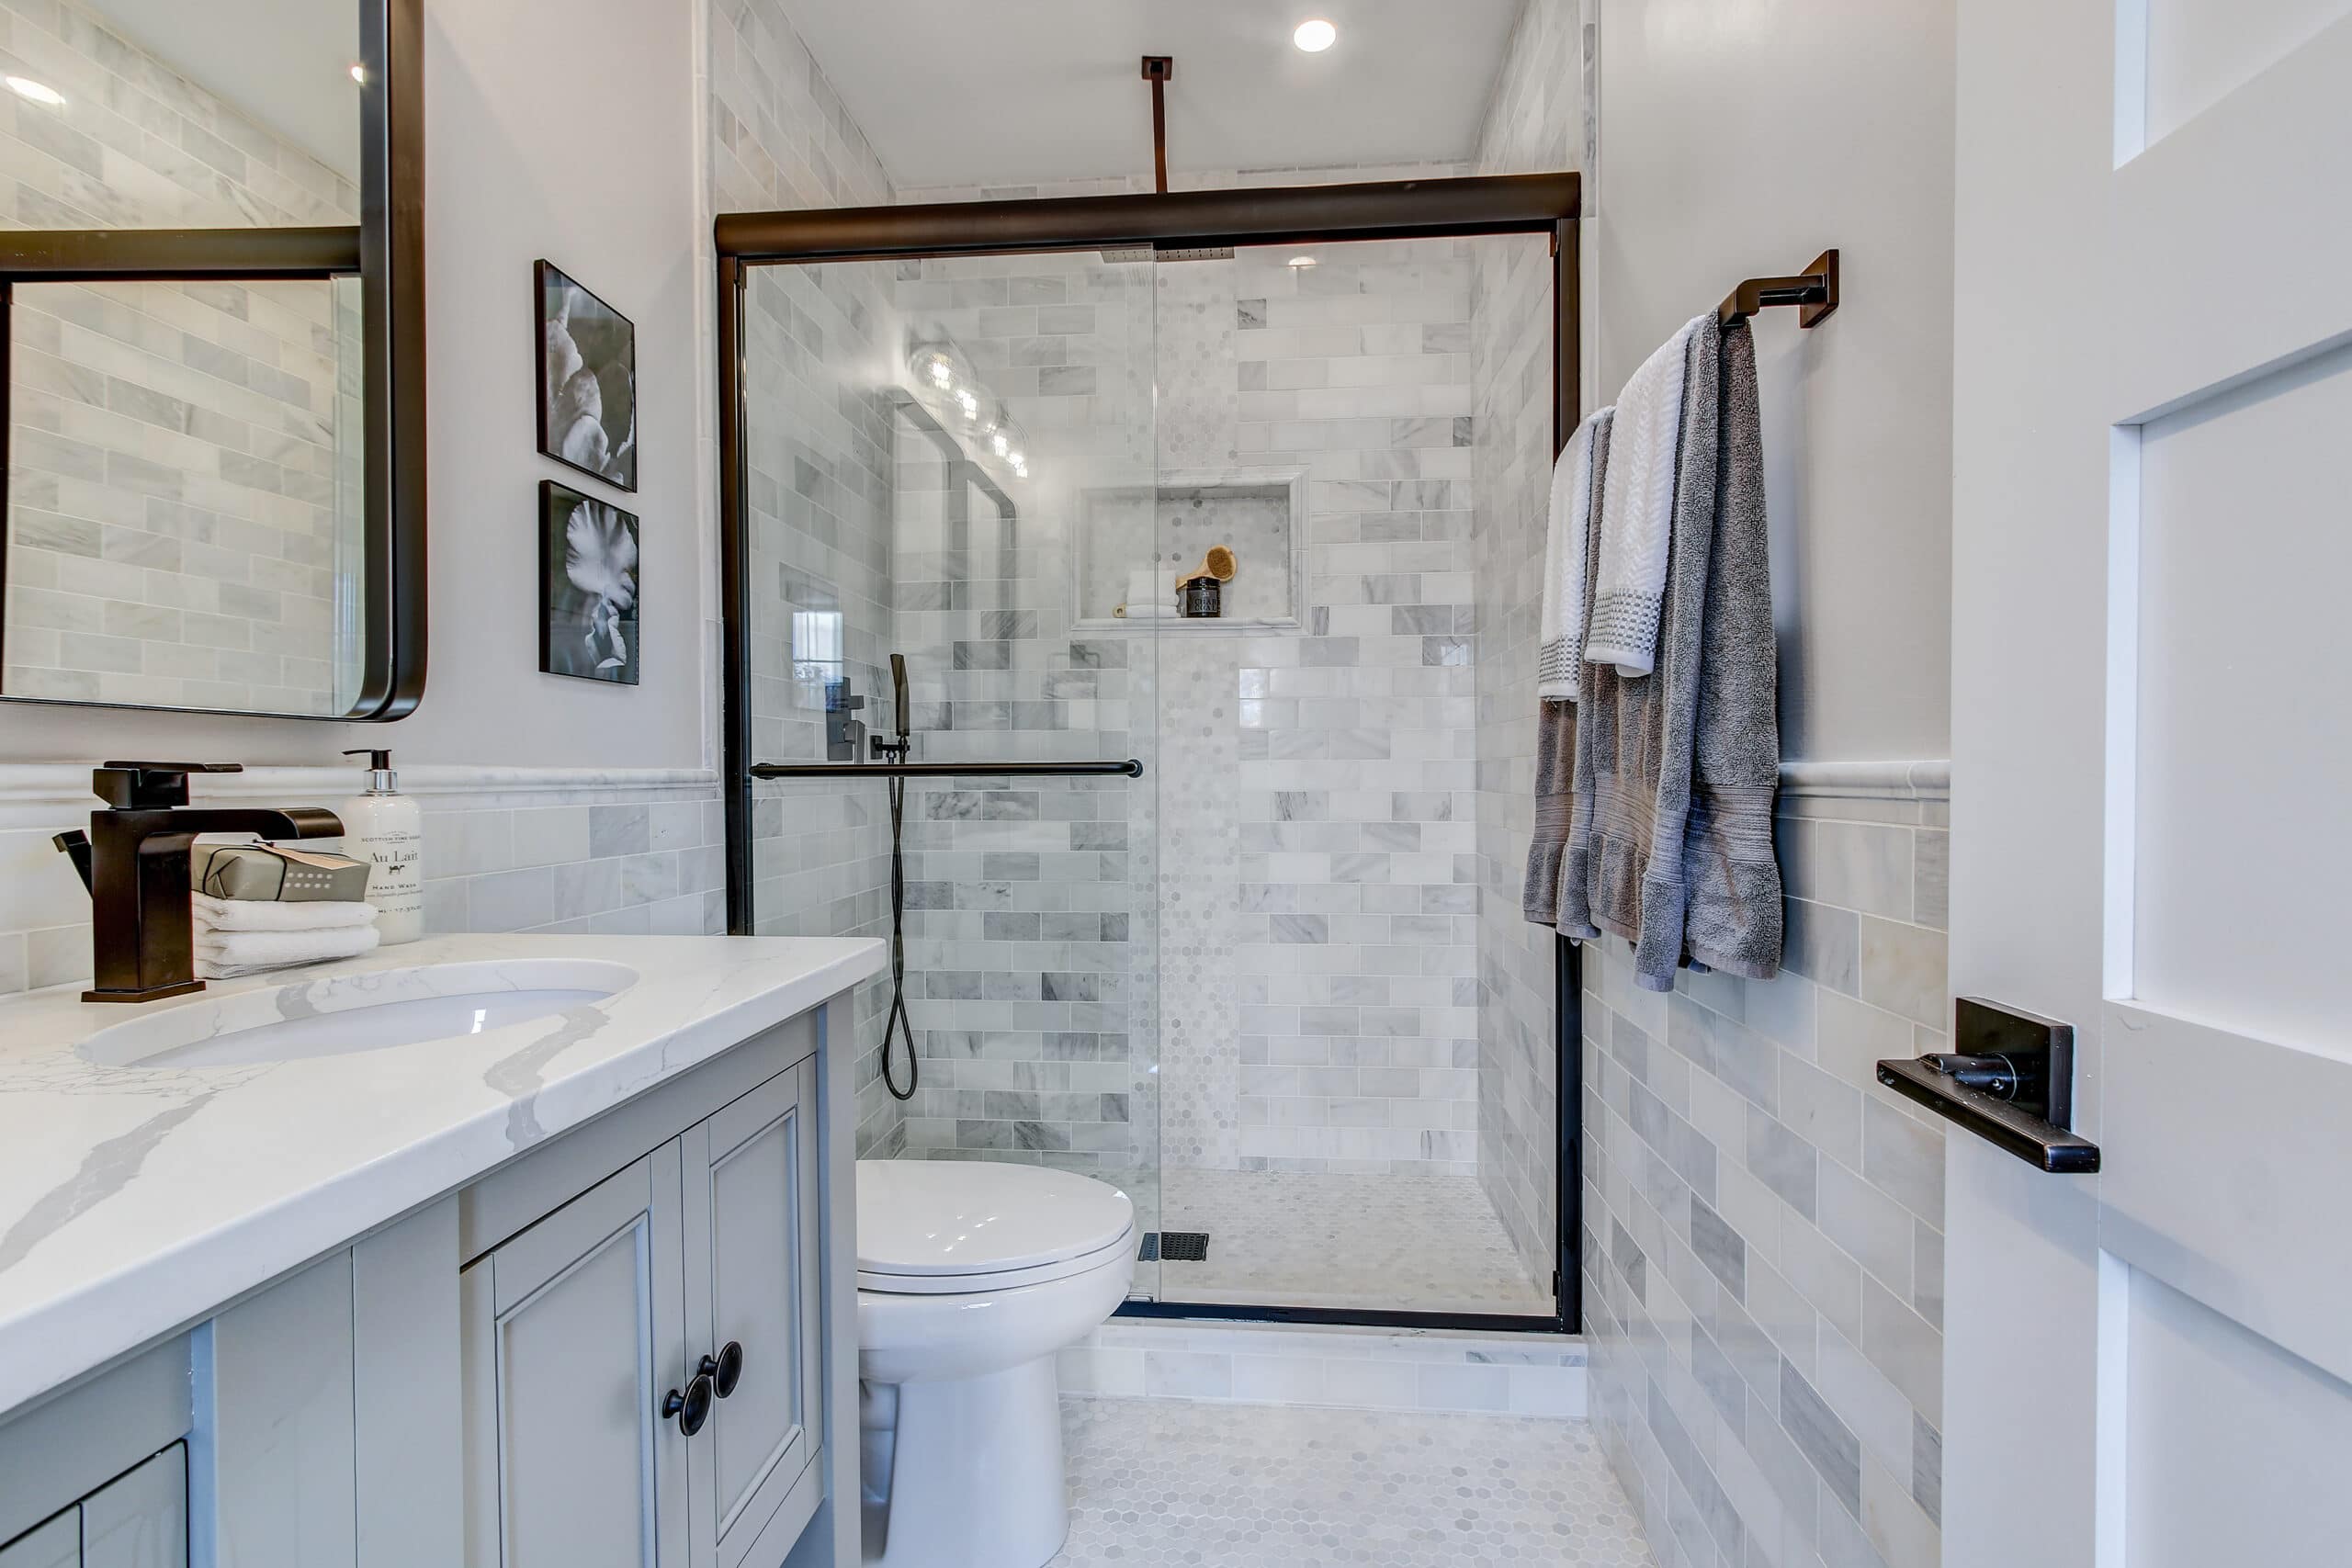 How To Add A Basement Bathroom And Do It The Right Way - Can You Put A Bathroom In Basement